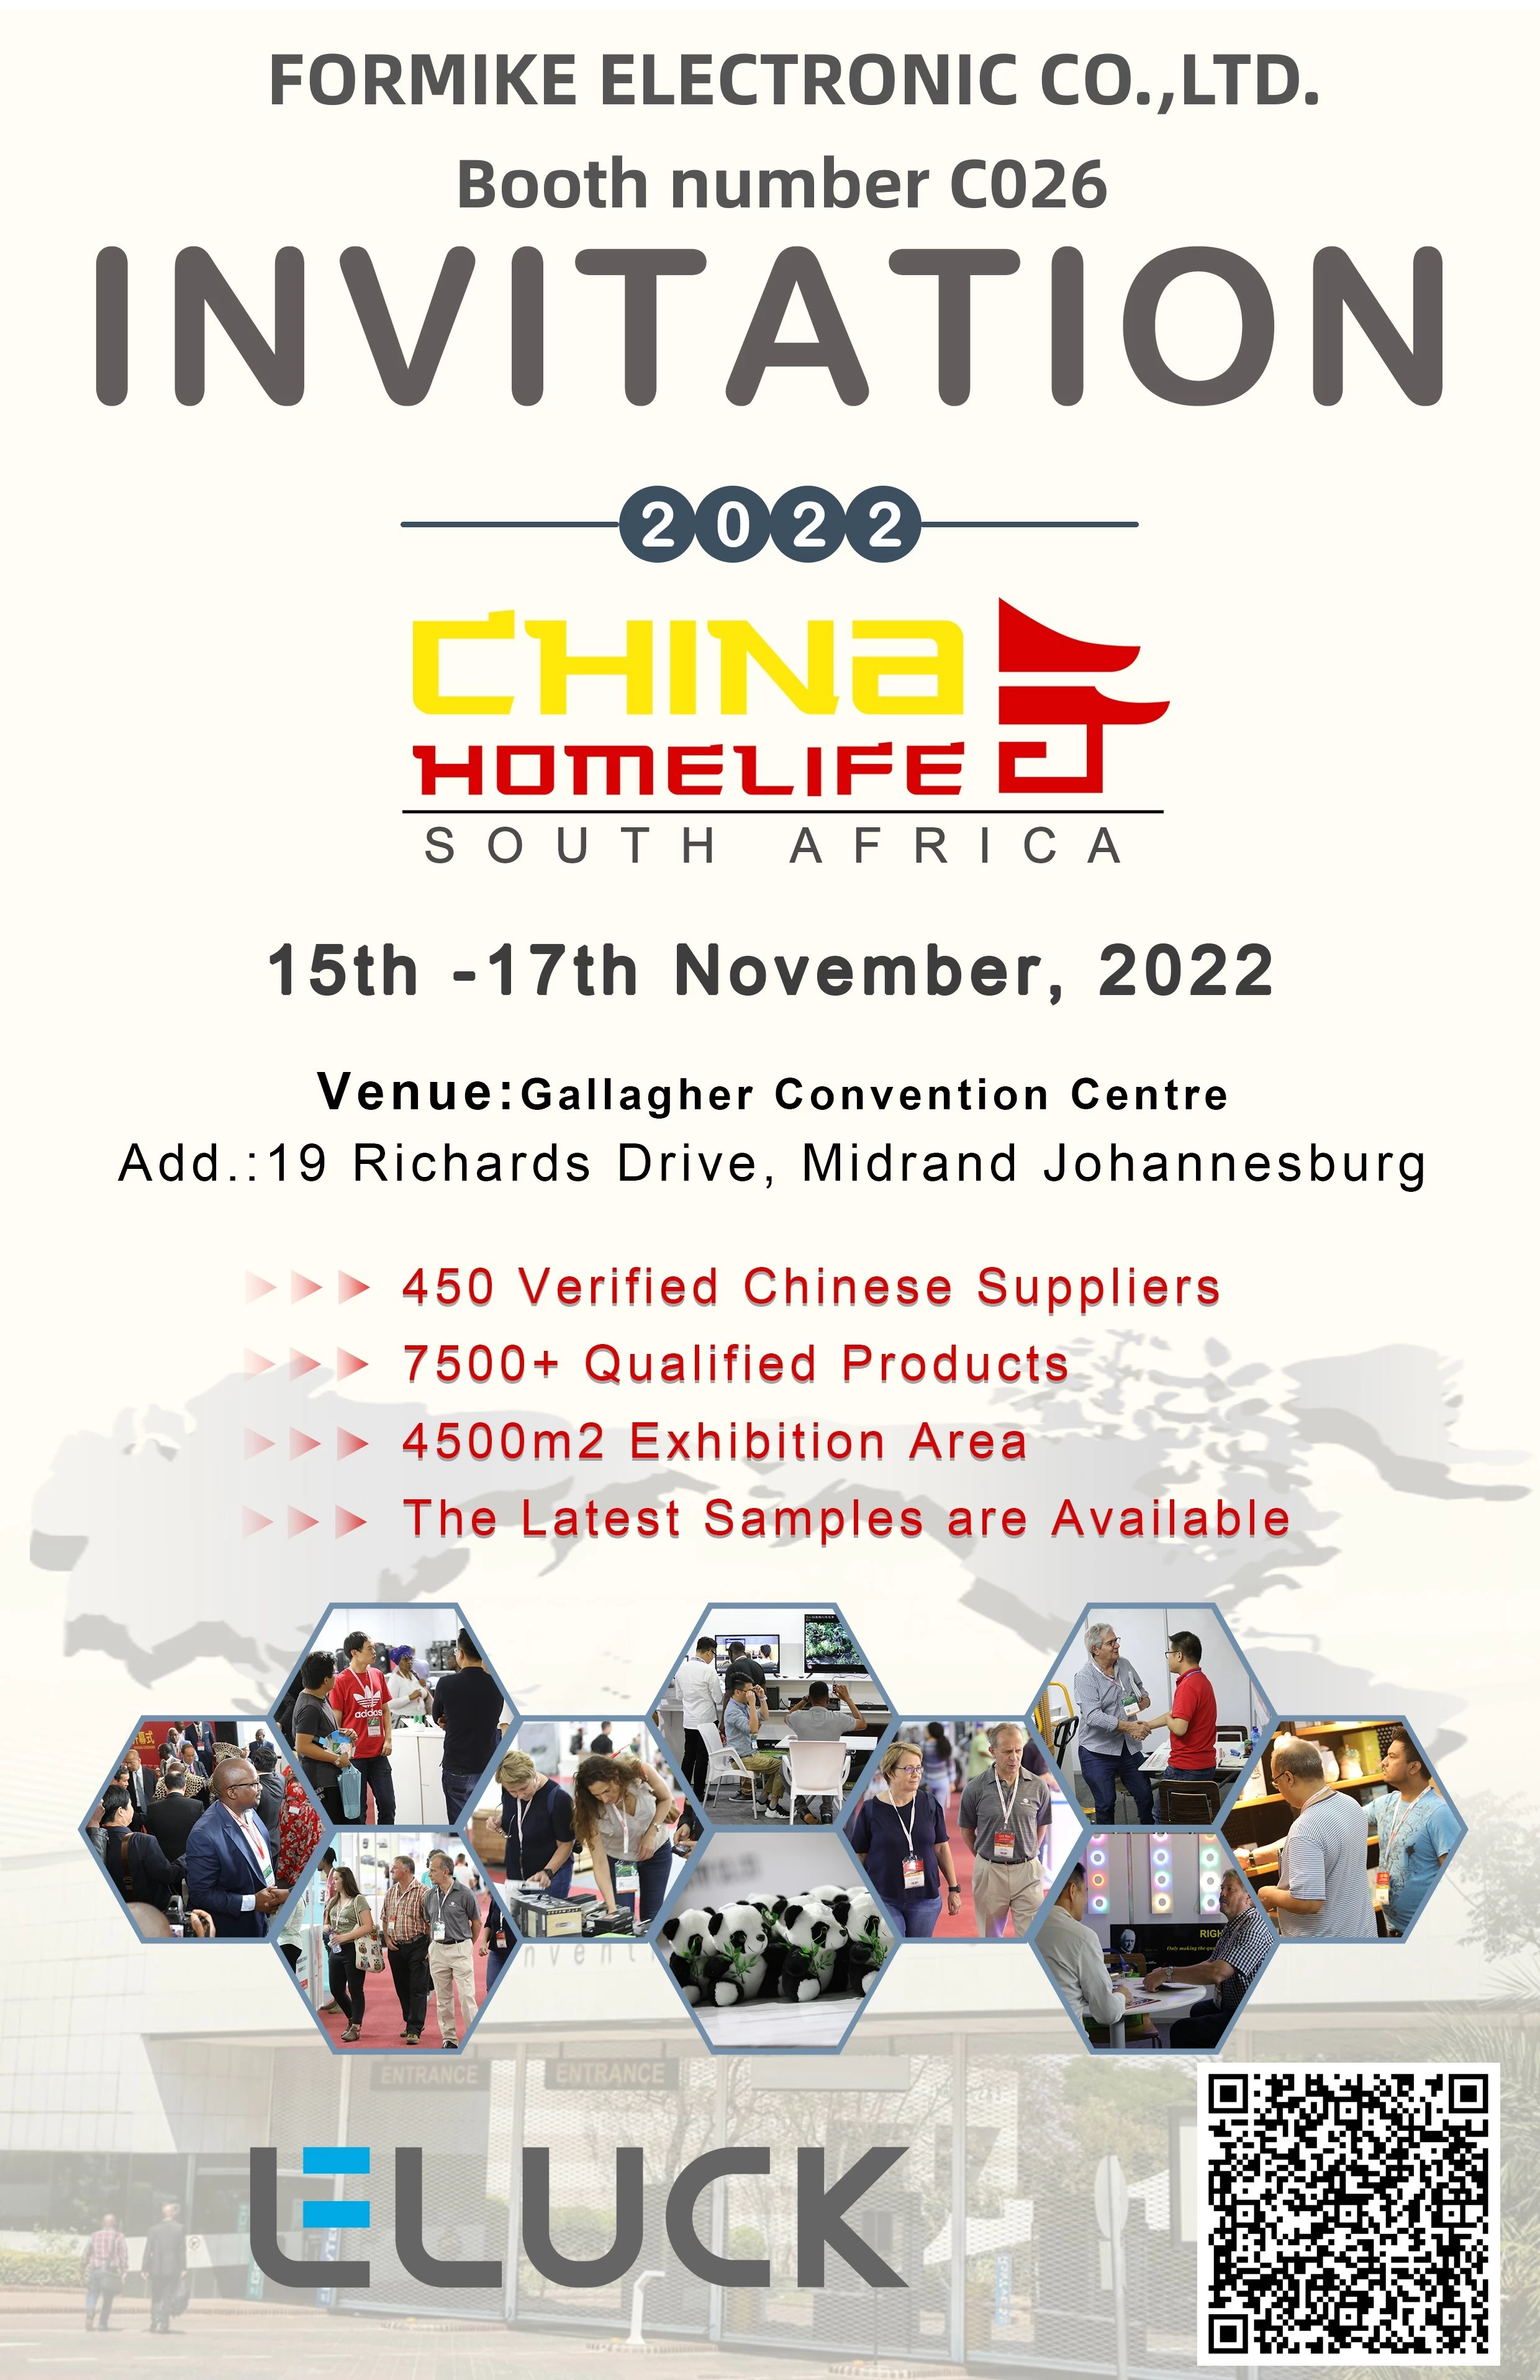 South Africa Smart Watch Exhibition FORMIKE